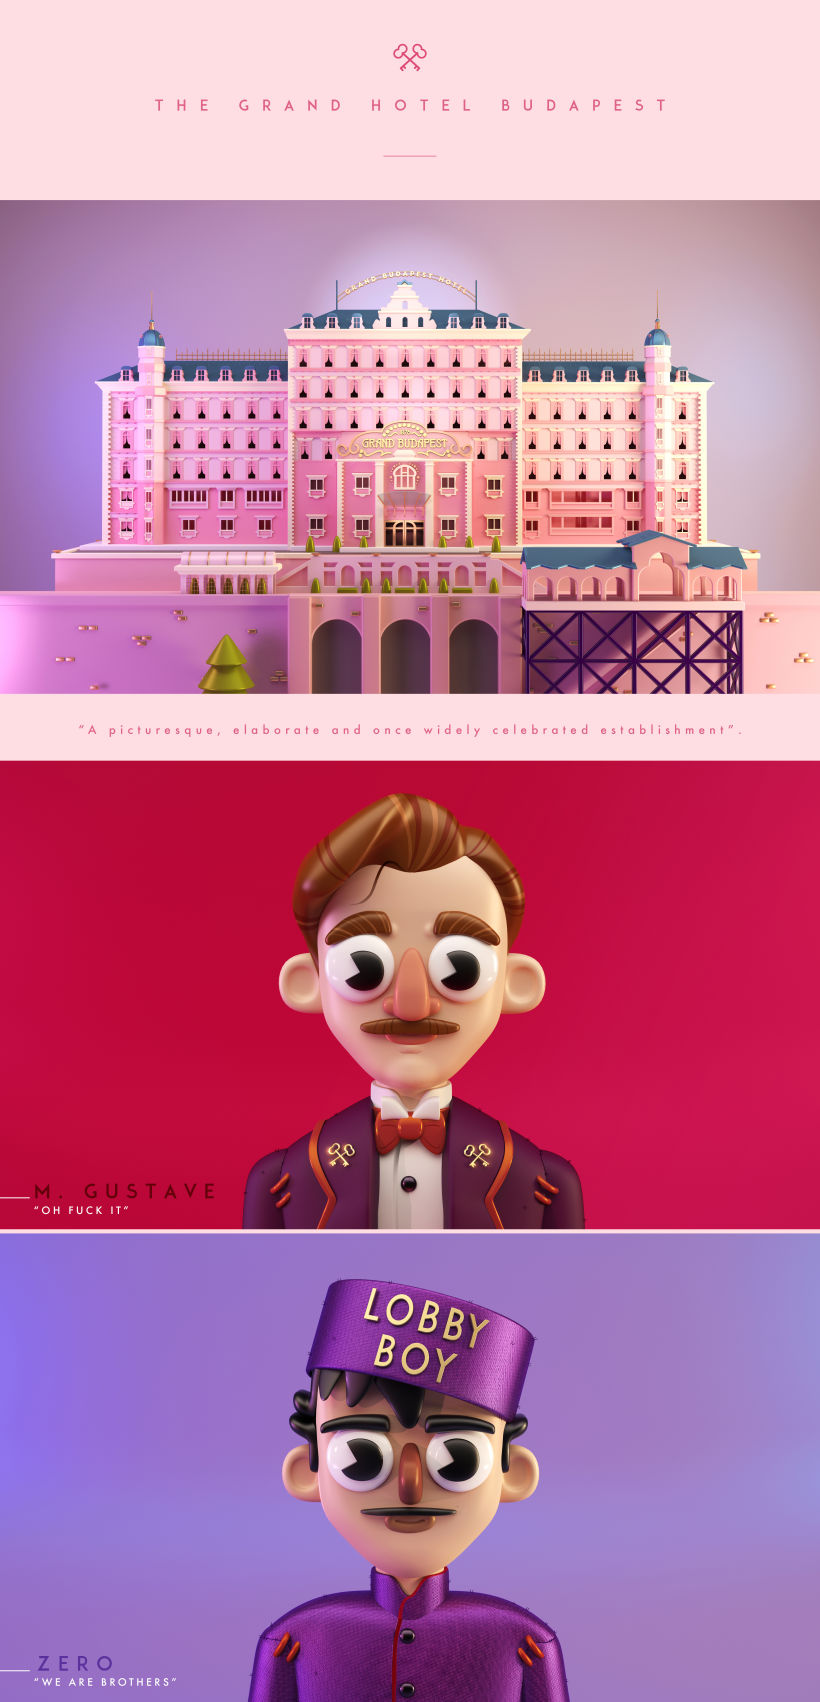 The Grand Hotel Budapest, tribute to W.A. -1